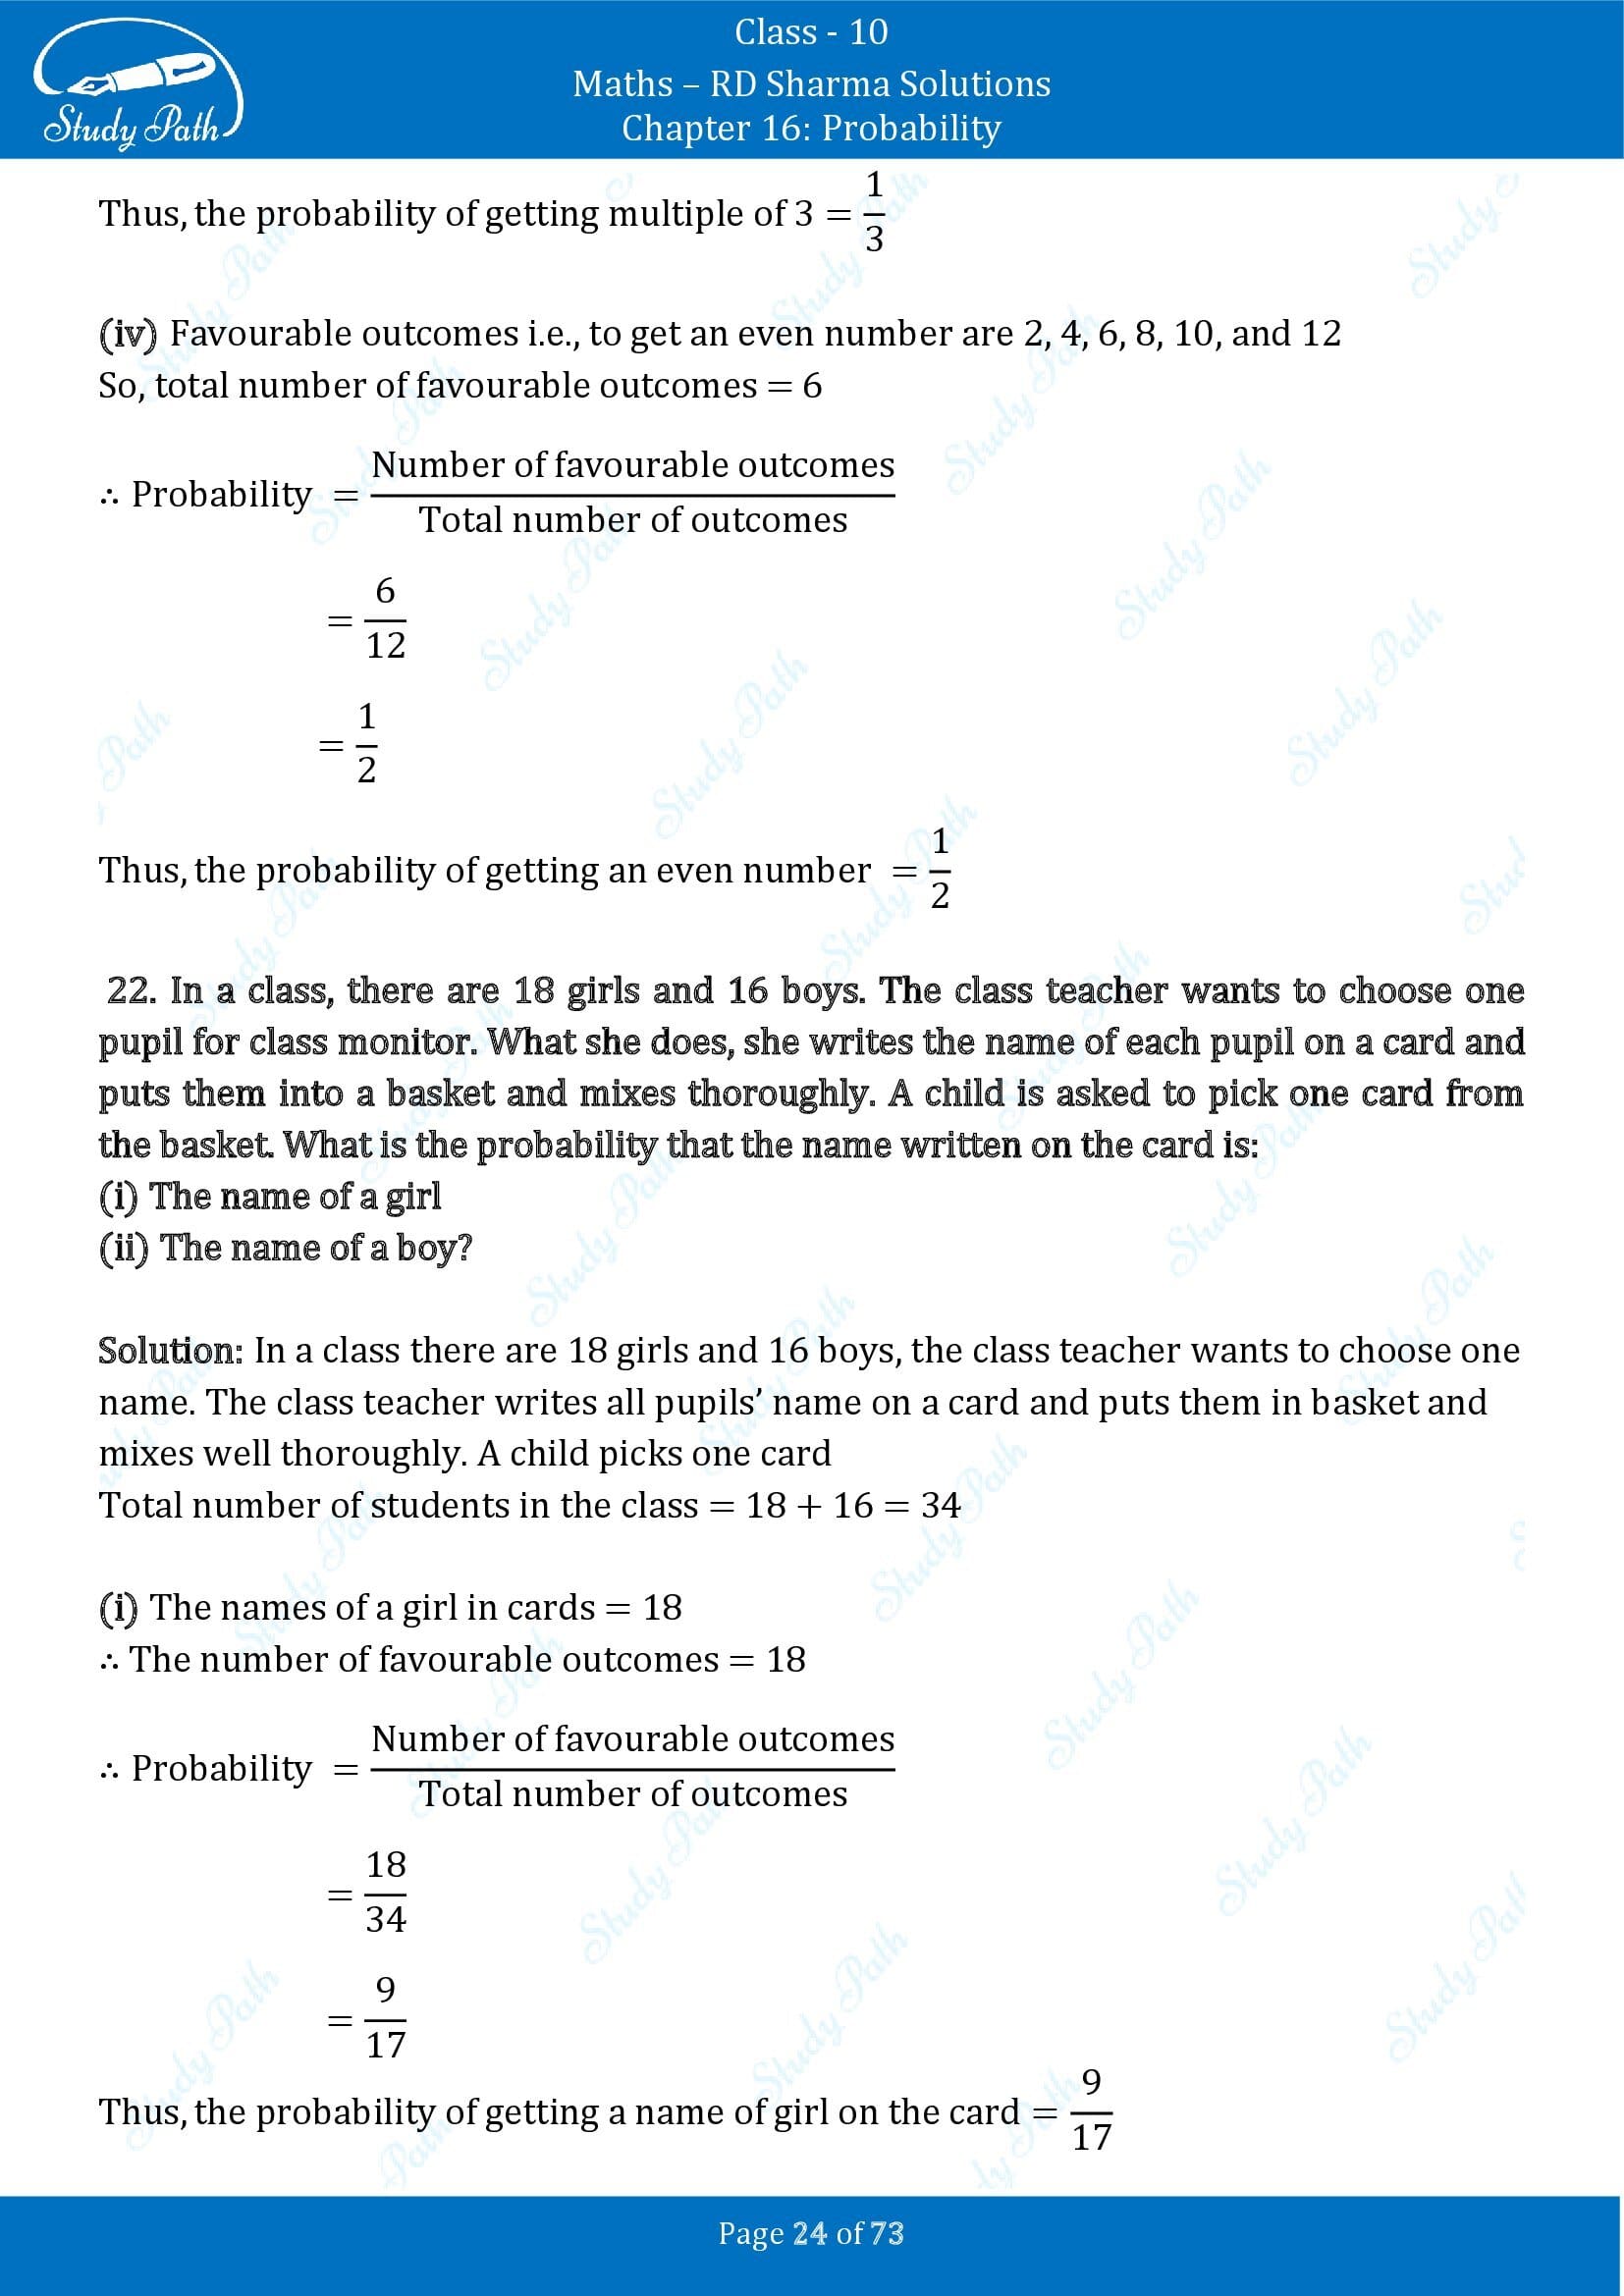 RD Sharma Solutions Class 10 Chapter 16 Probability Exercise 16.1 00024